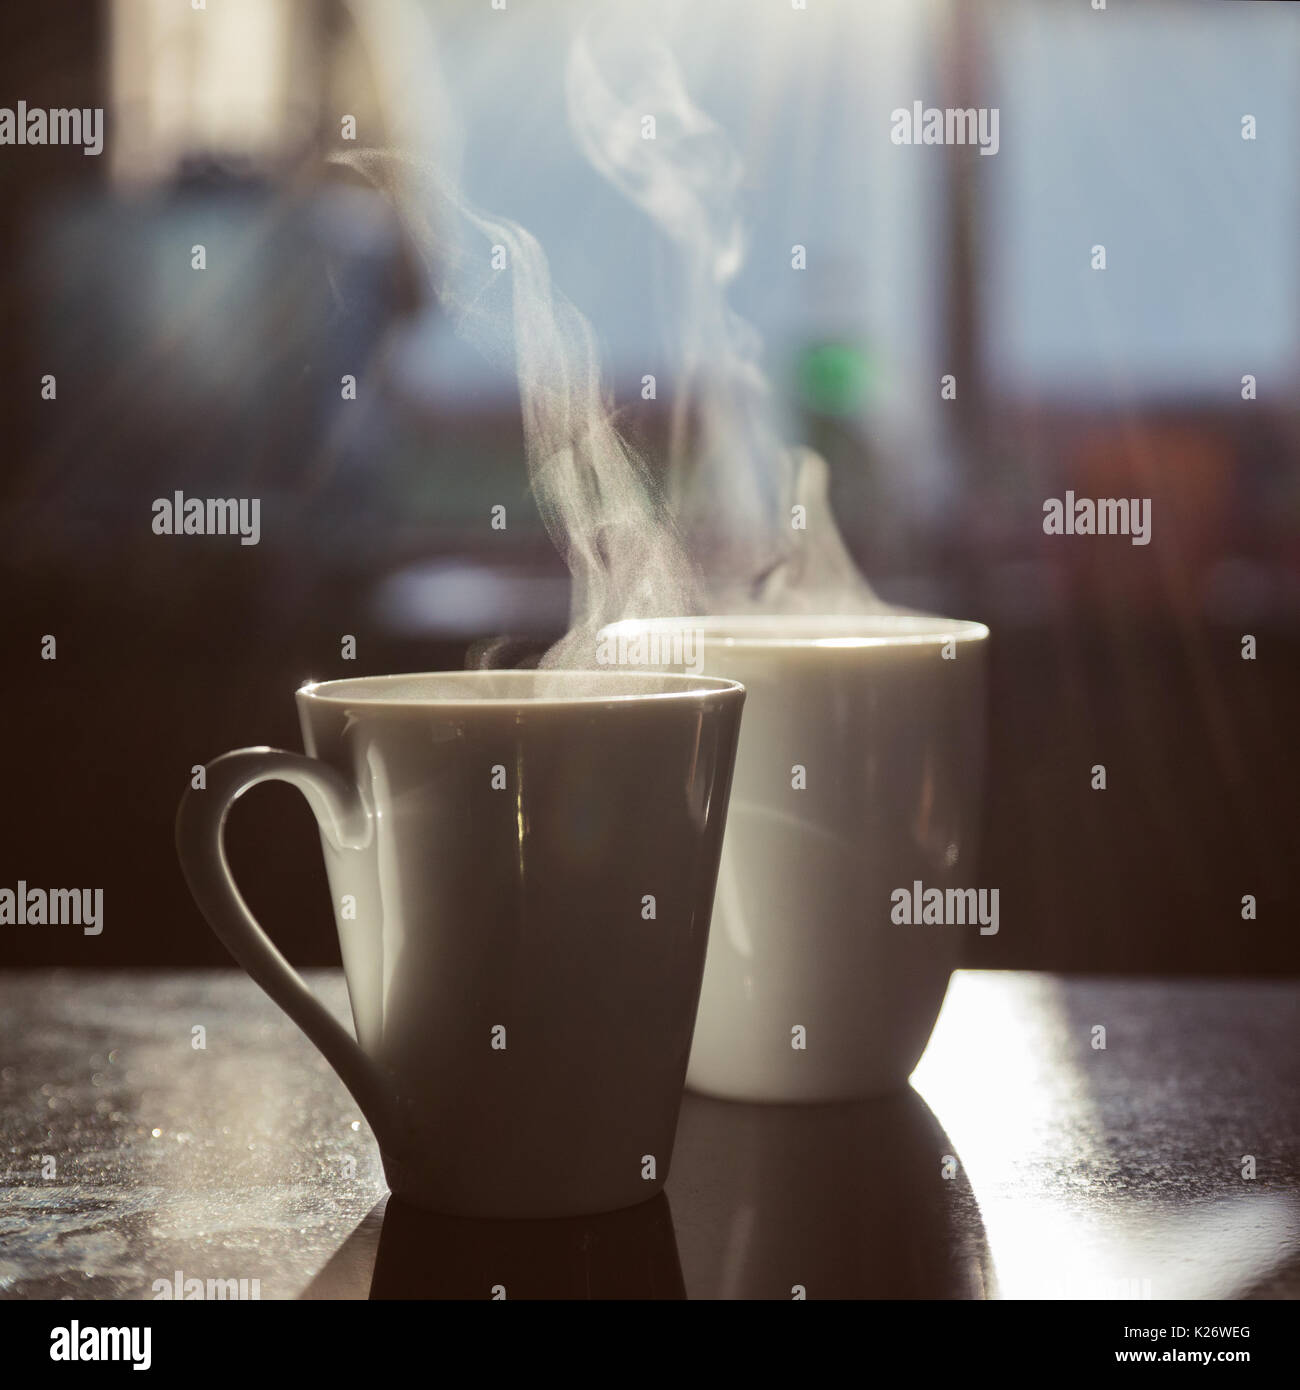 Two cups of coffee, steaming, standing on table, backlit Stock Photo